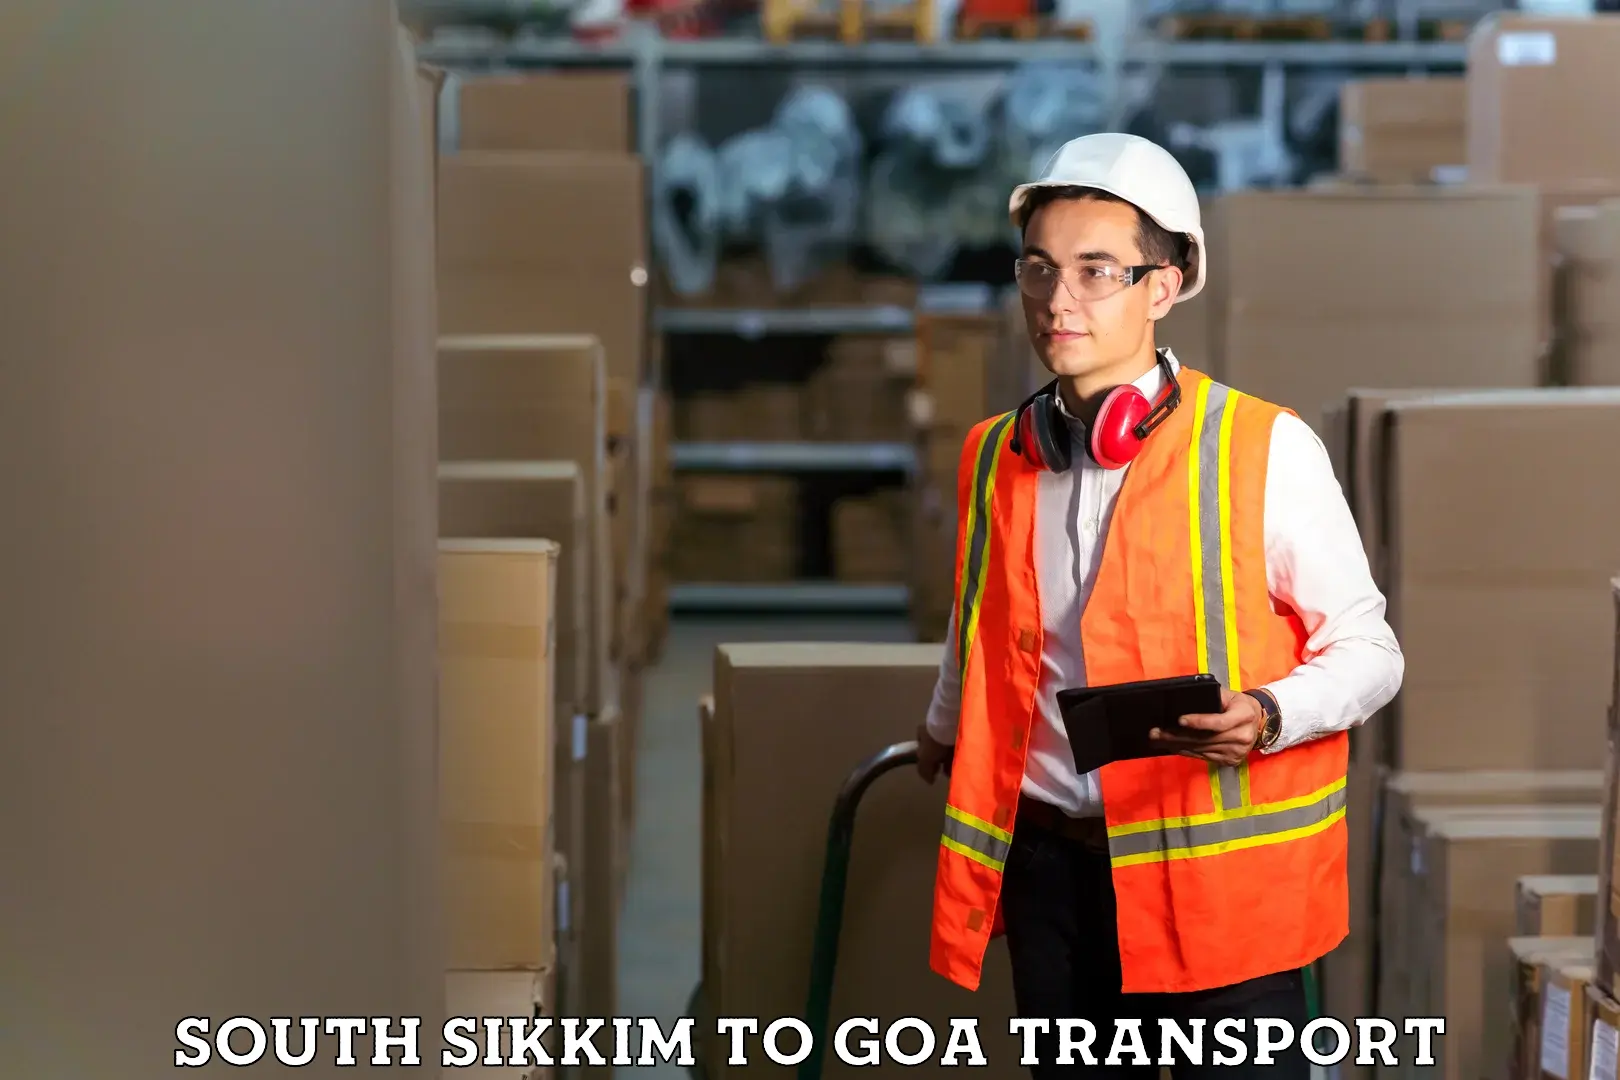 Transport bike from one state to another South Sikkim to Goa